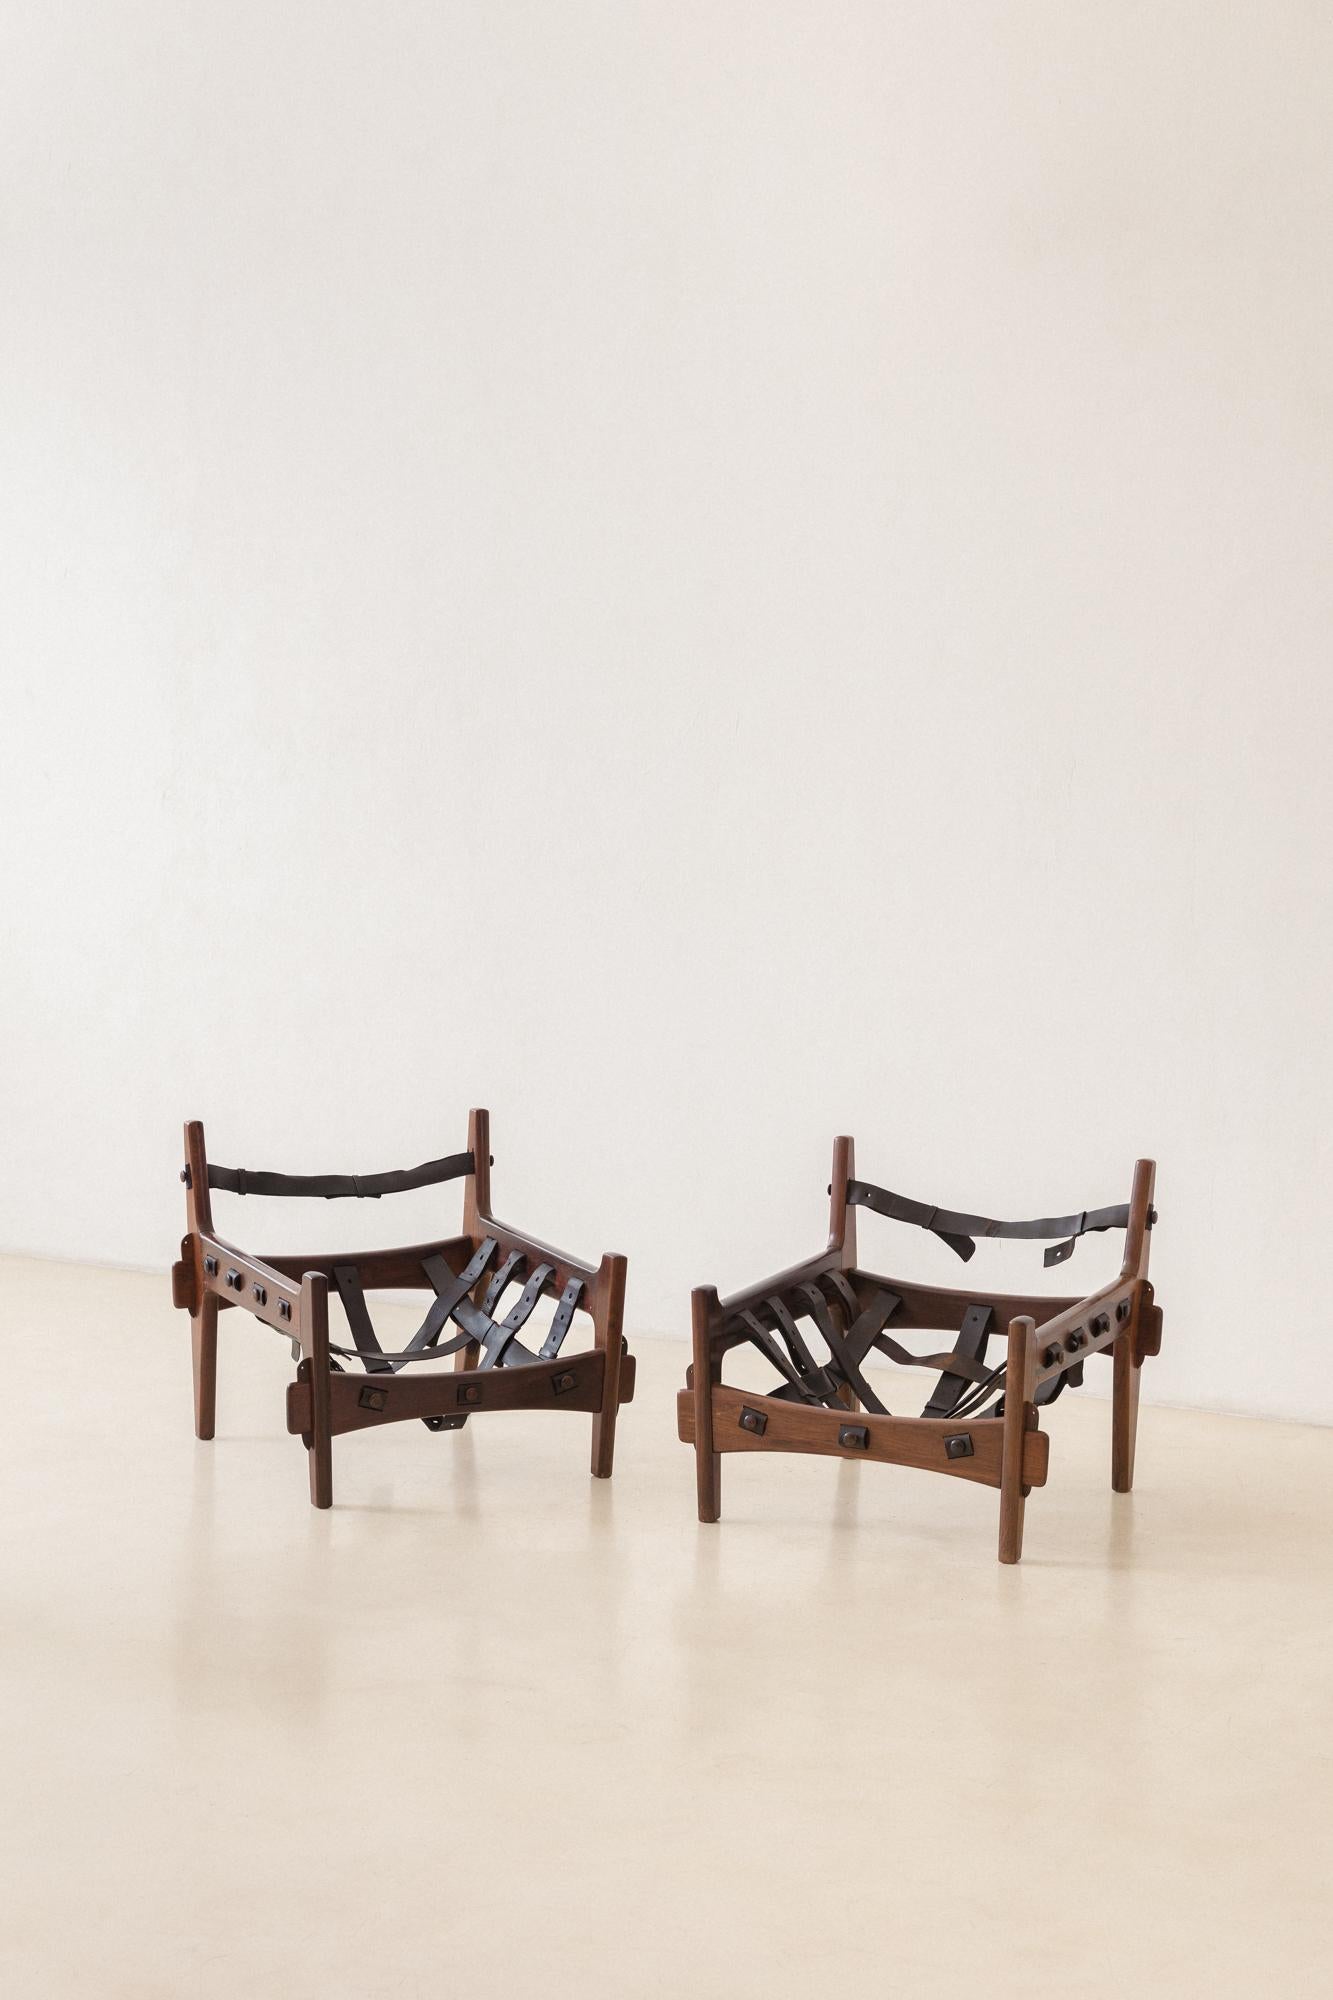 Vintage Pair of Moleca Rosewood Armchairs by Sergio Rodrigues, 1962, Brazil For Sale 7